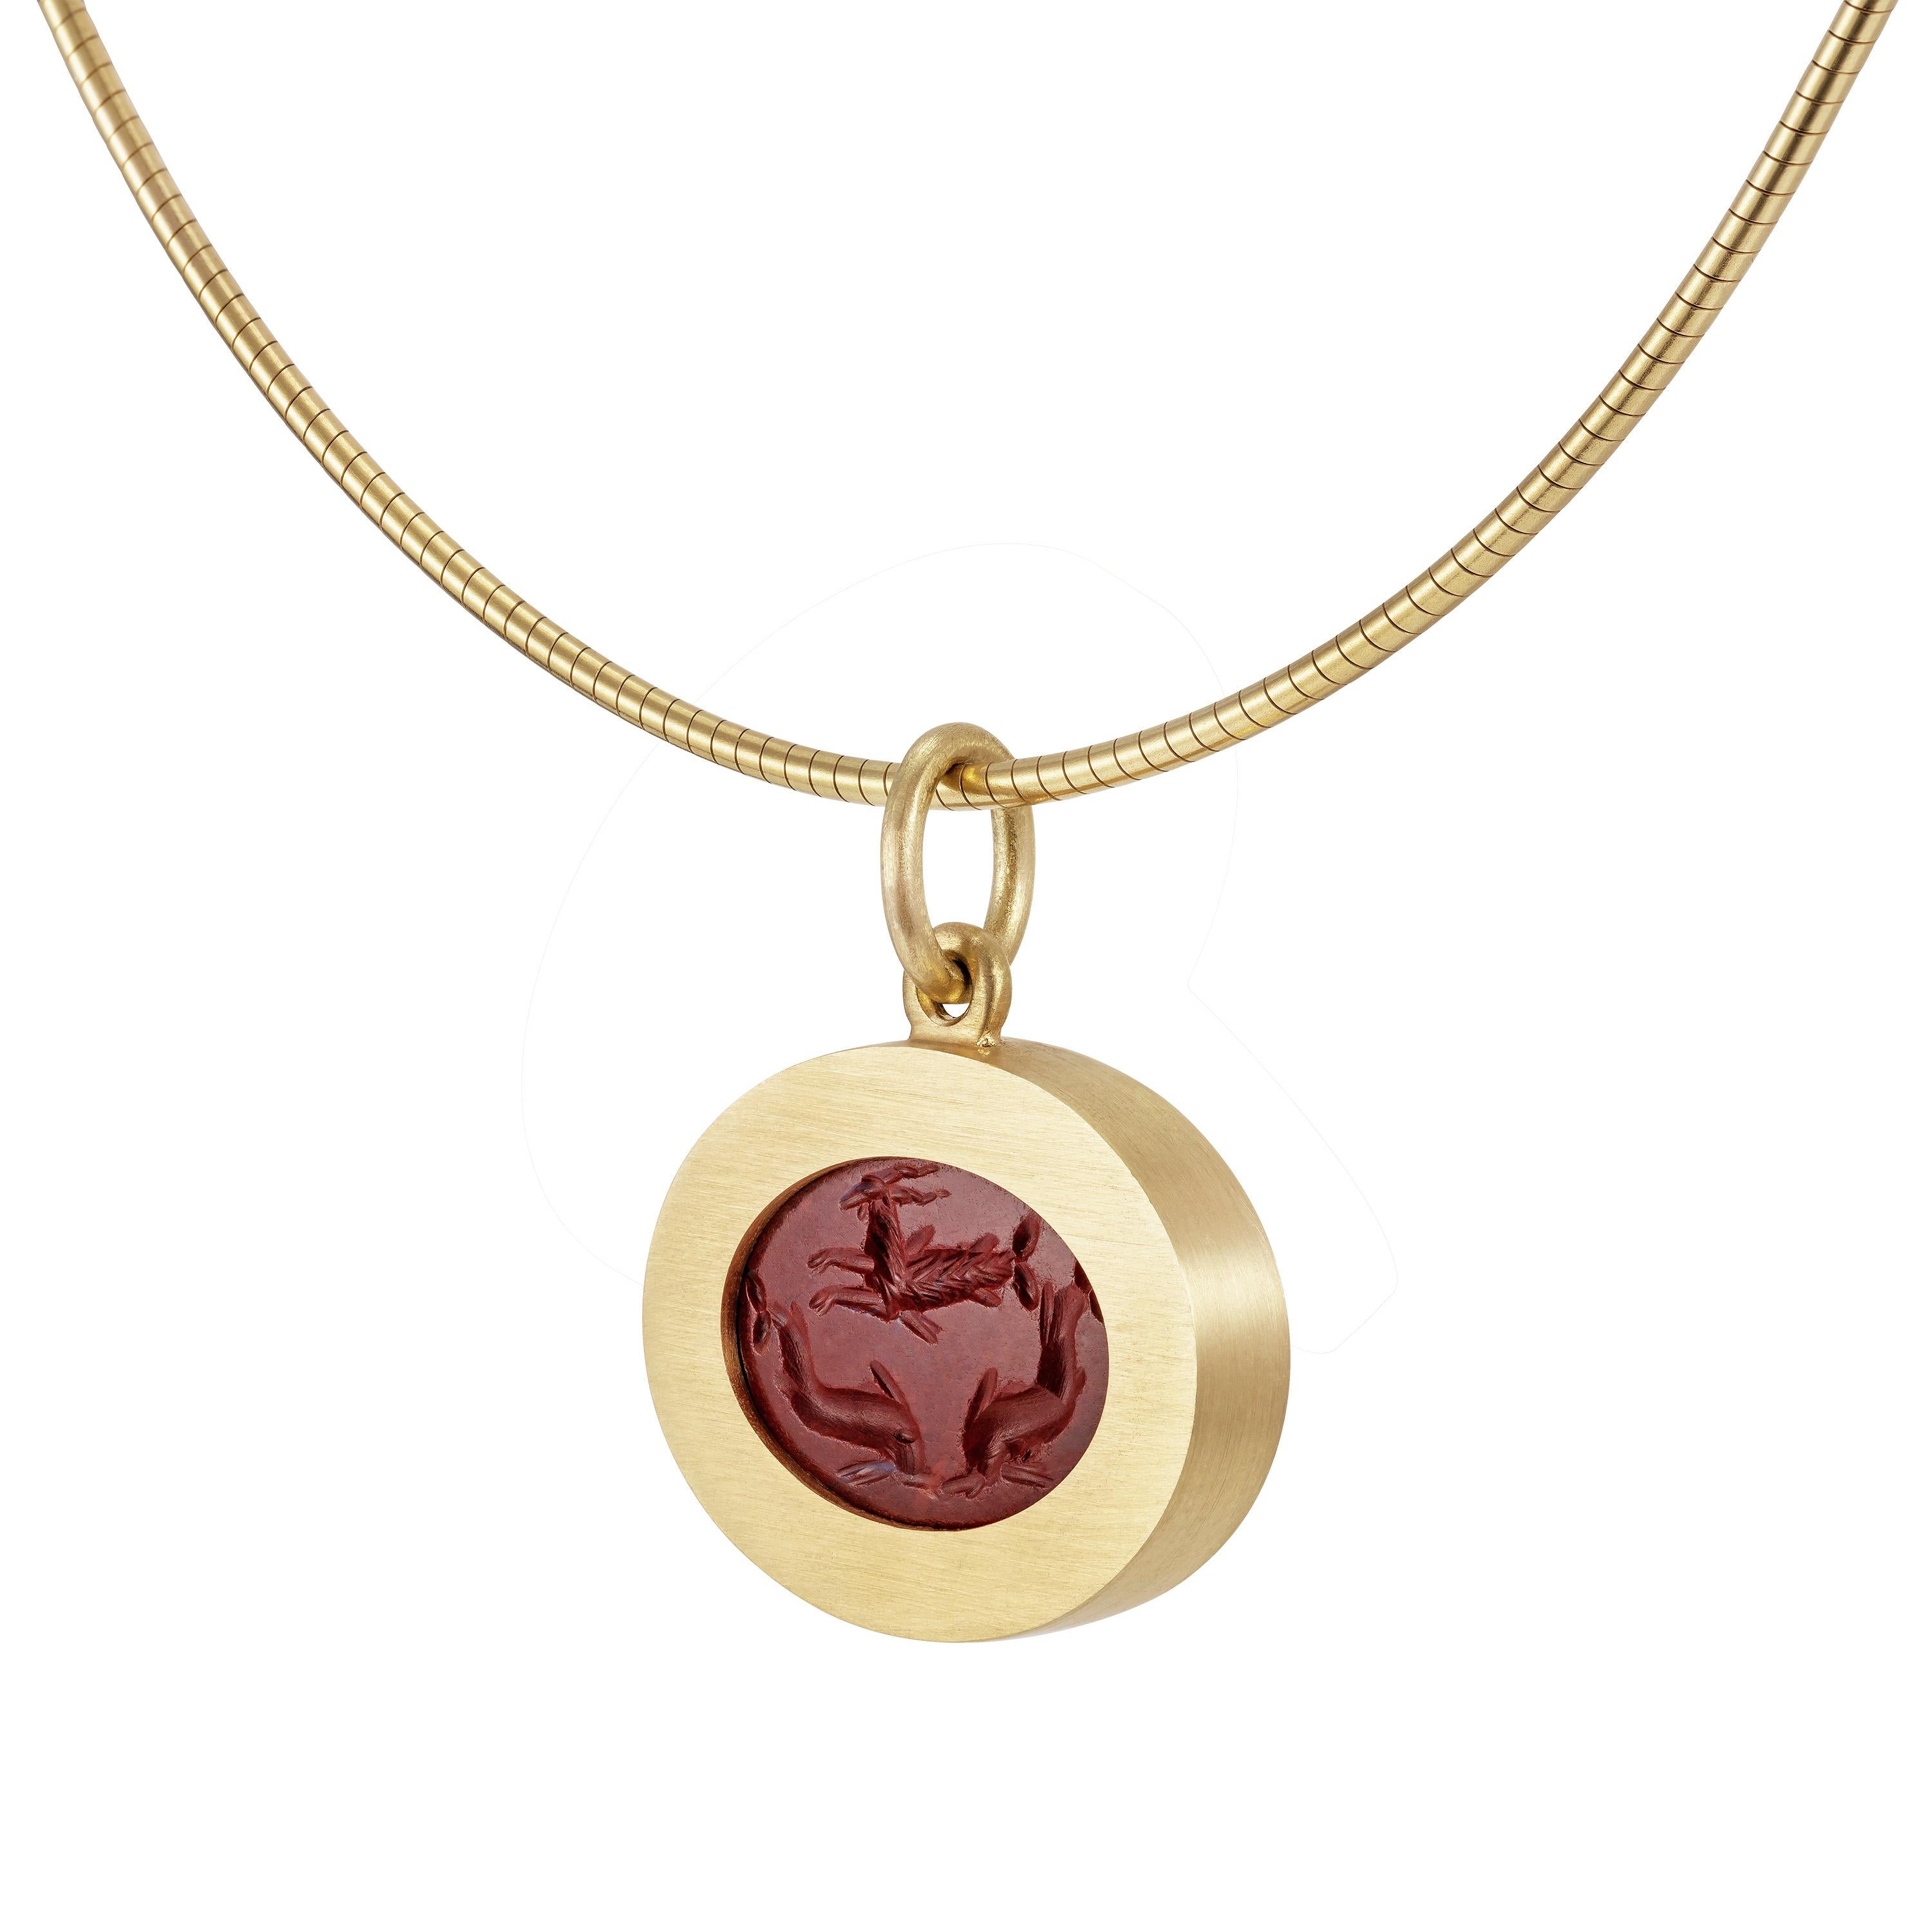 Victoria Strigini (b. 1991)

A contemporary 18k yellow gold pendant necklace featuring a Roman jasper intaglio from the 2nd – 3rd century AD depicting a Capricorn and two dolphins. The animals, symbols of good luck, are gracefully incised in deep